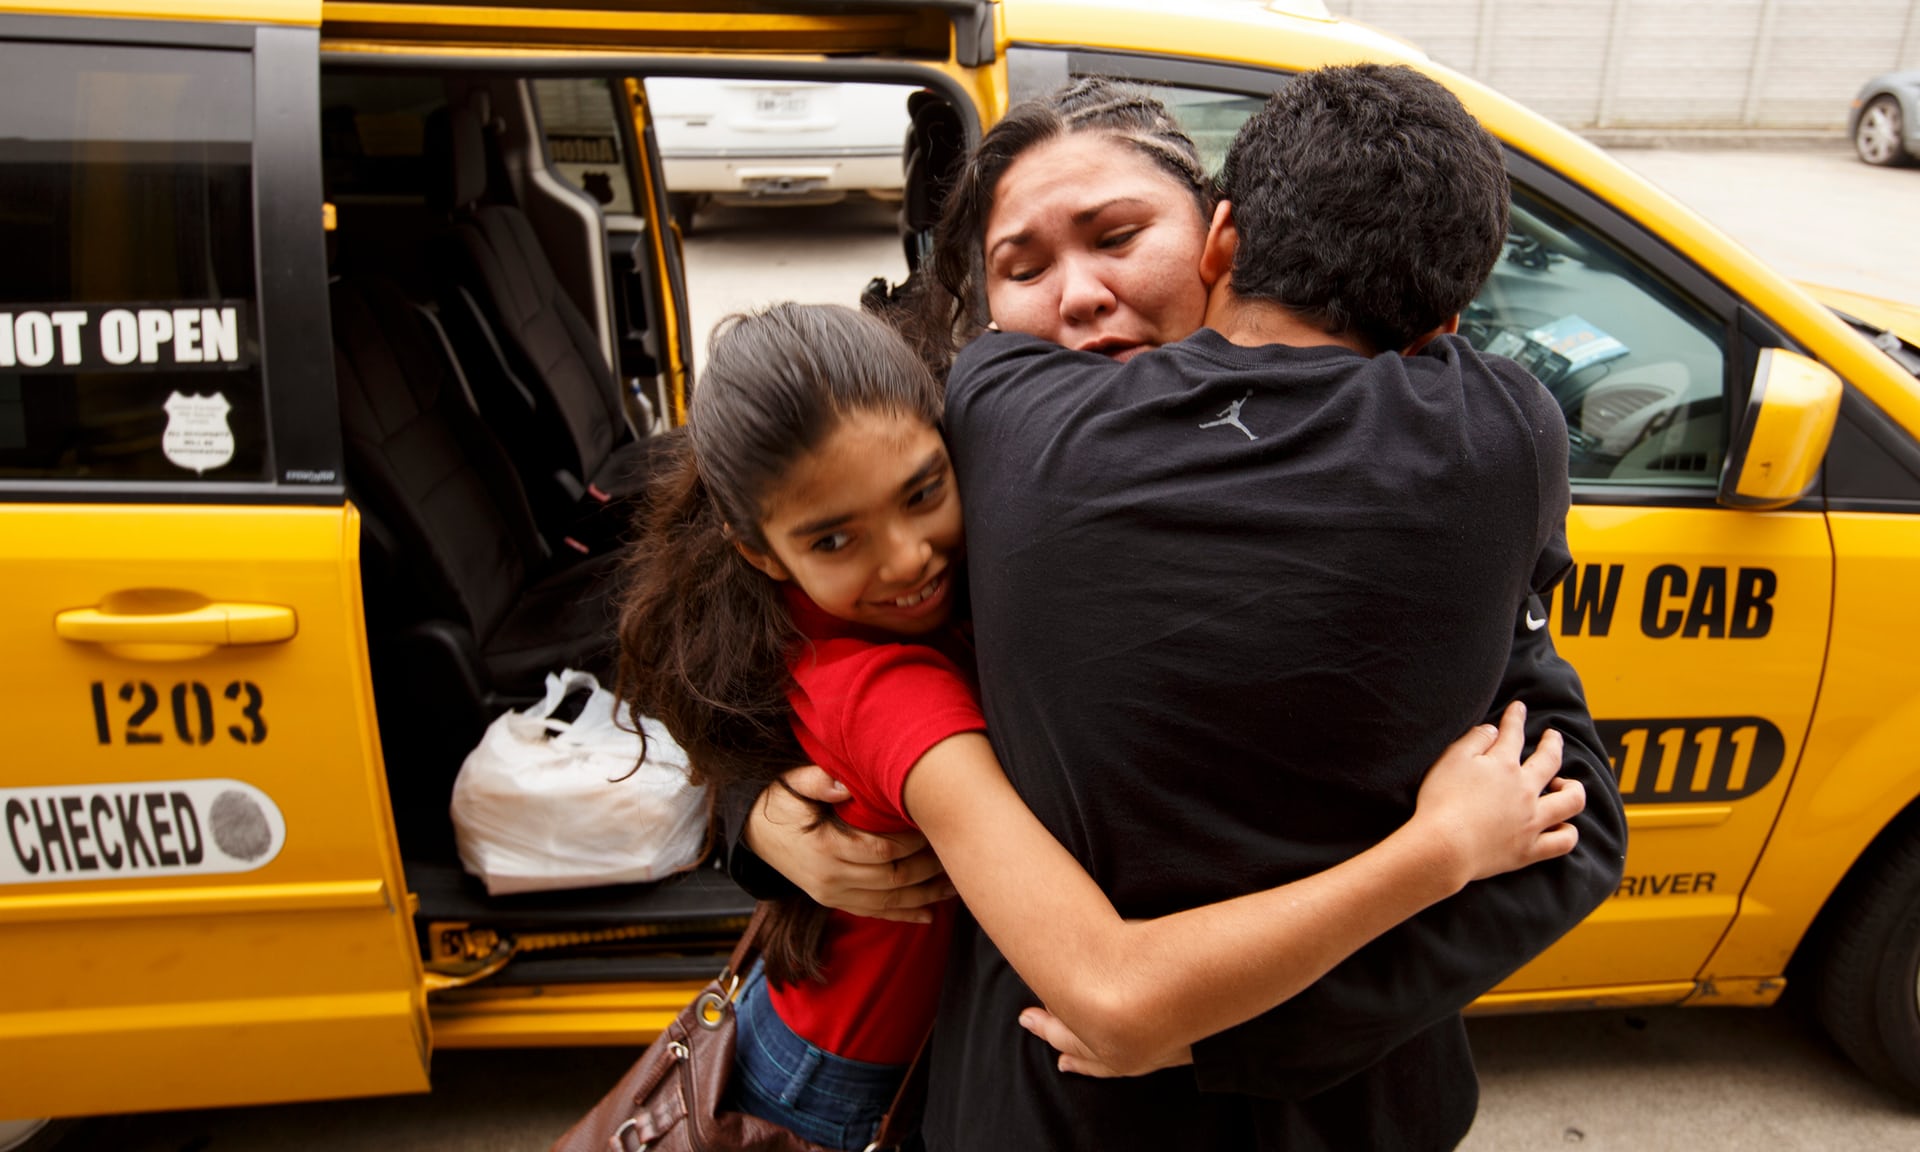 Silvana Bermudez hugs her children outside a bus station in Houston, Texas, on 16 March. She and her kids were caught by Ice and sent to separate facilities after leaving El Salvador. Photograph: The Washington Post/Getty Images